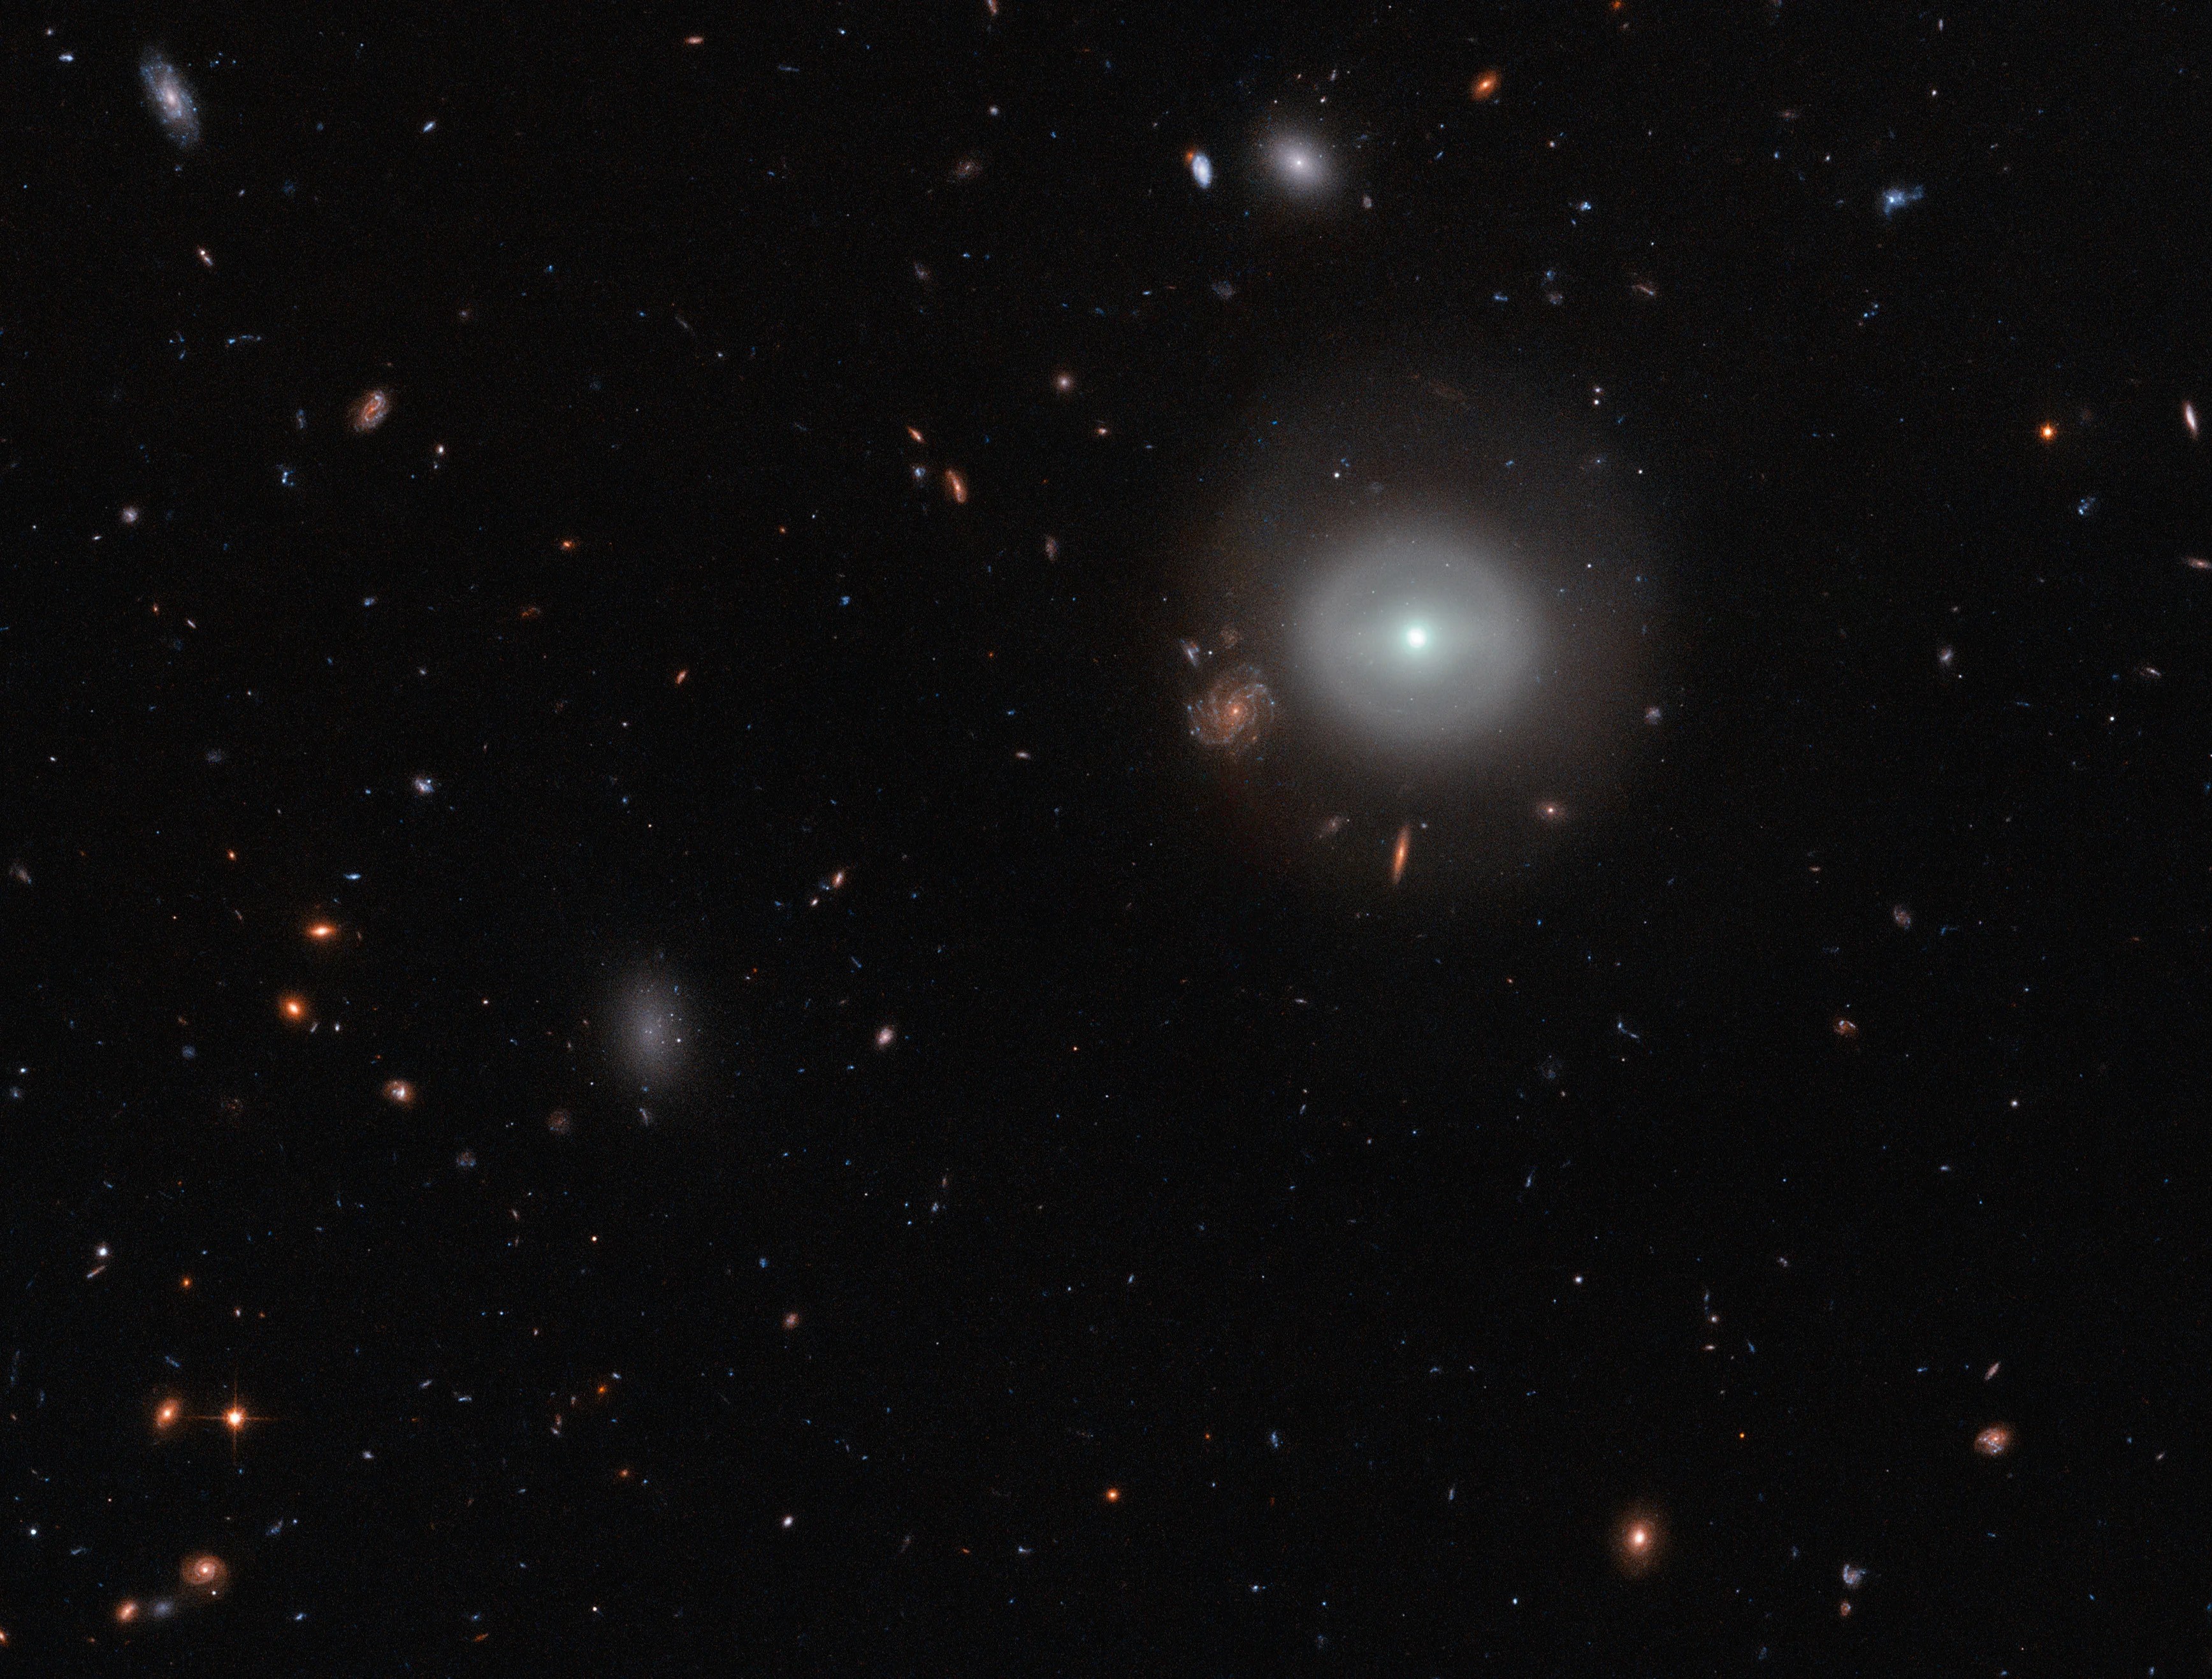 Hubble image of outskirts and core of PGC 83677